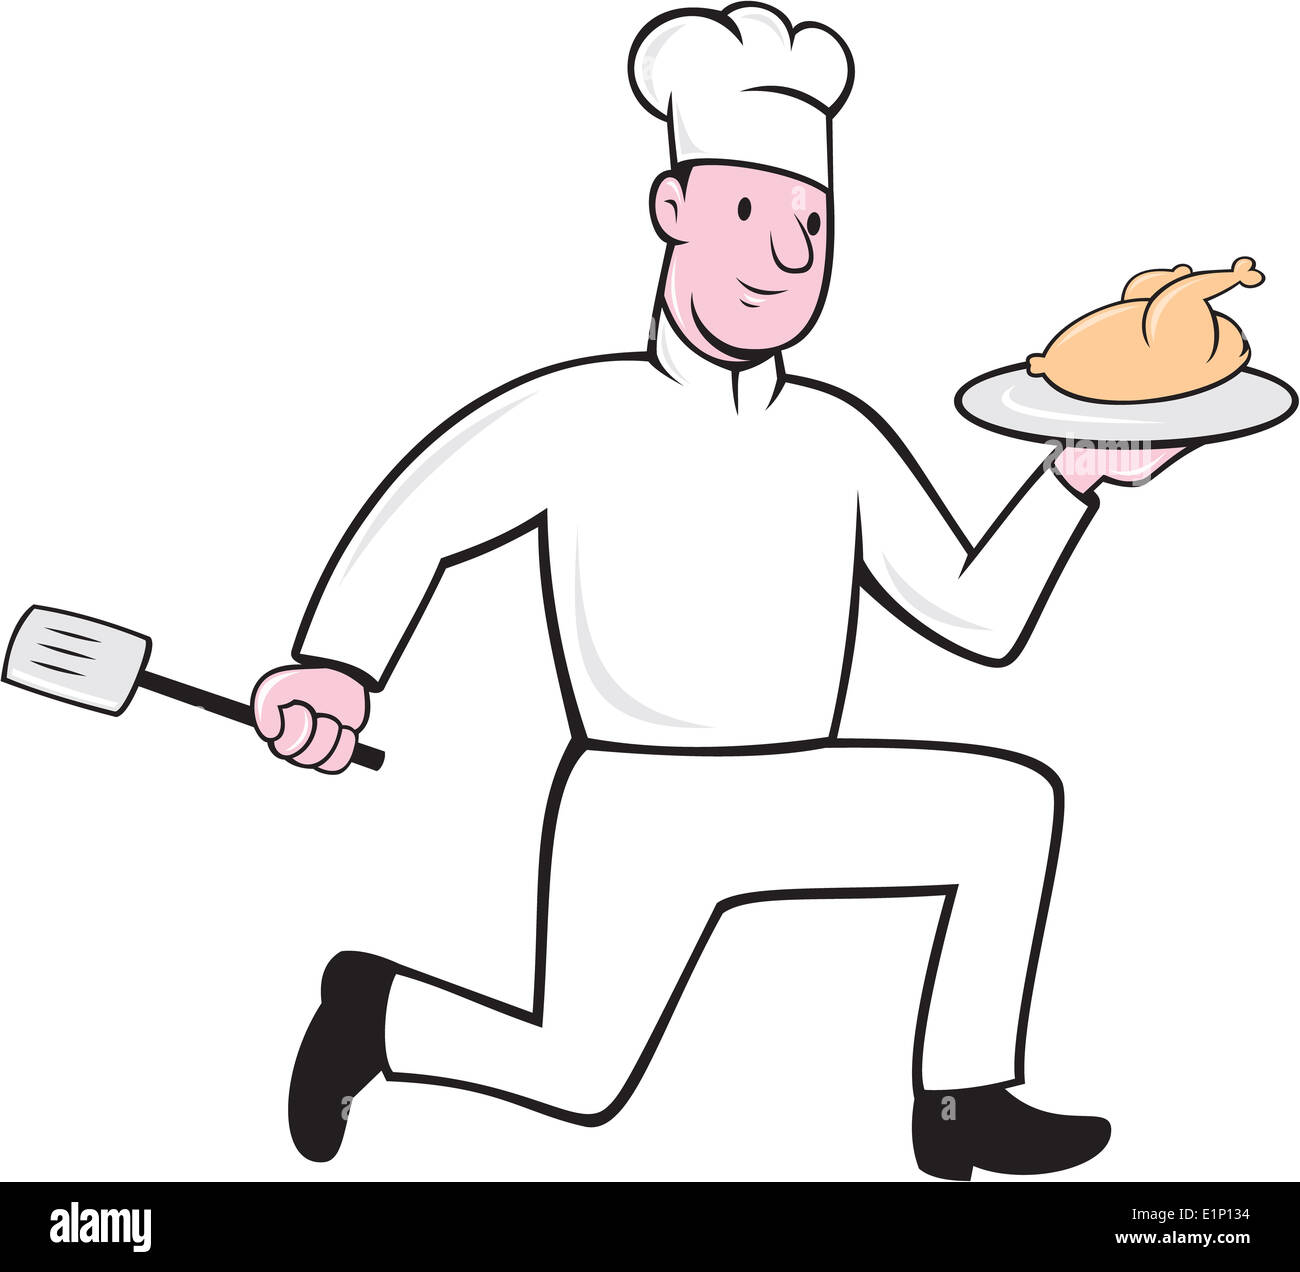 Illustration of a chef cook holding plate with chicken in one hand and spatula on other hand running on isolated white background done in cartoon style. Stock Photo